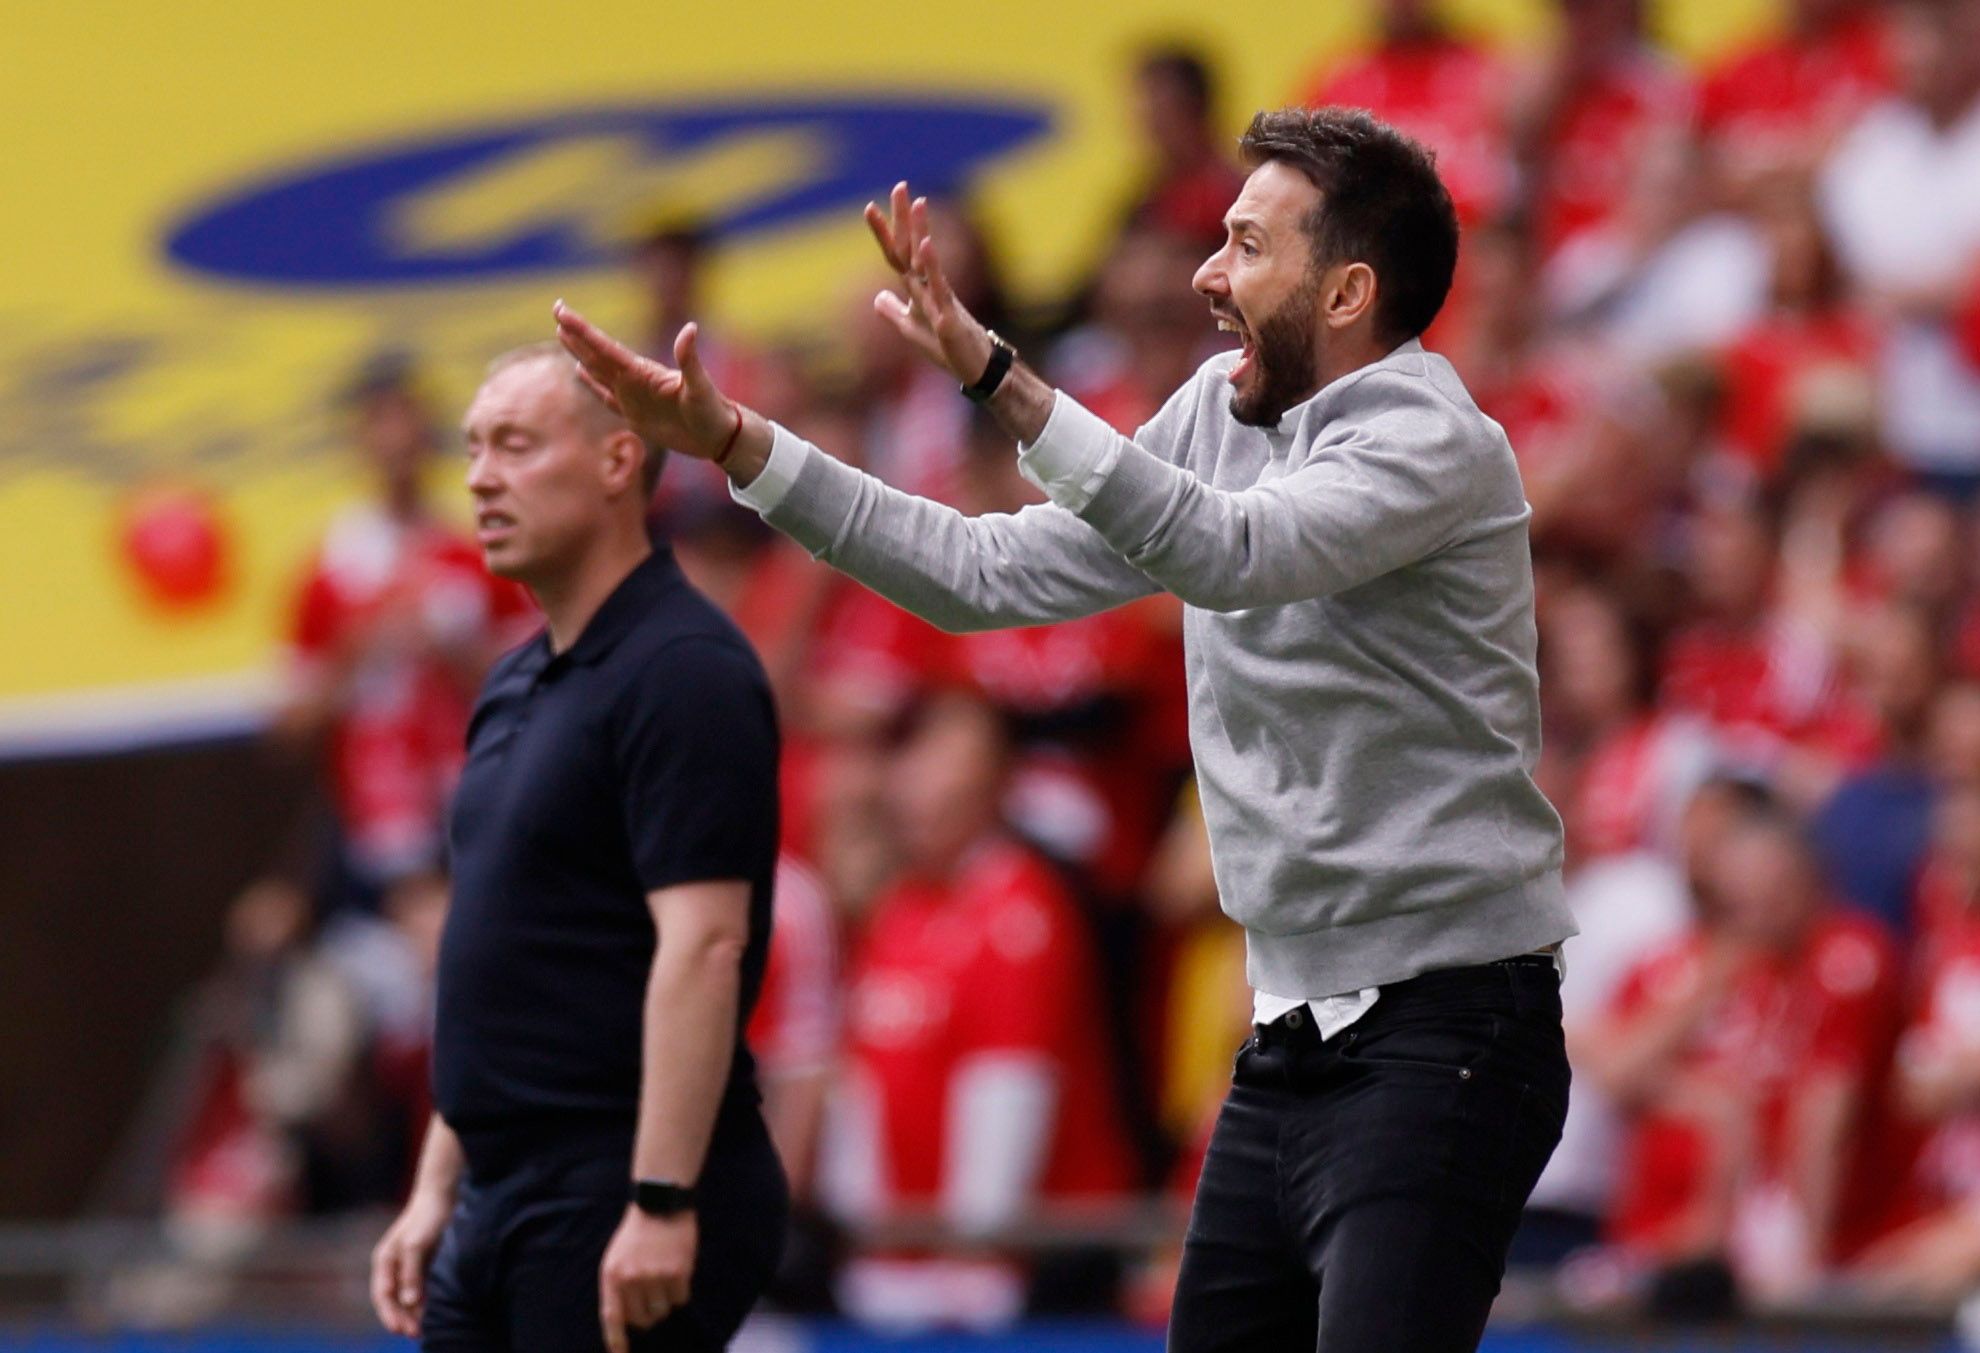 Soccer Football - Championship Play-Off Final - Huddersfield Town v Nottingham Forest - Wembley Stadium, London, Britain - May 29, 2022 Nottingham Forest manager Steve Cooper and Huddersfield Town manager Carlos Corberan Action Images via Reuters/Andrew Couldridge